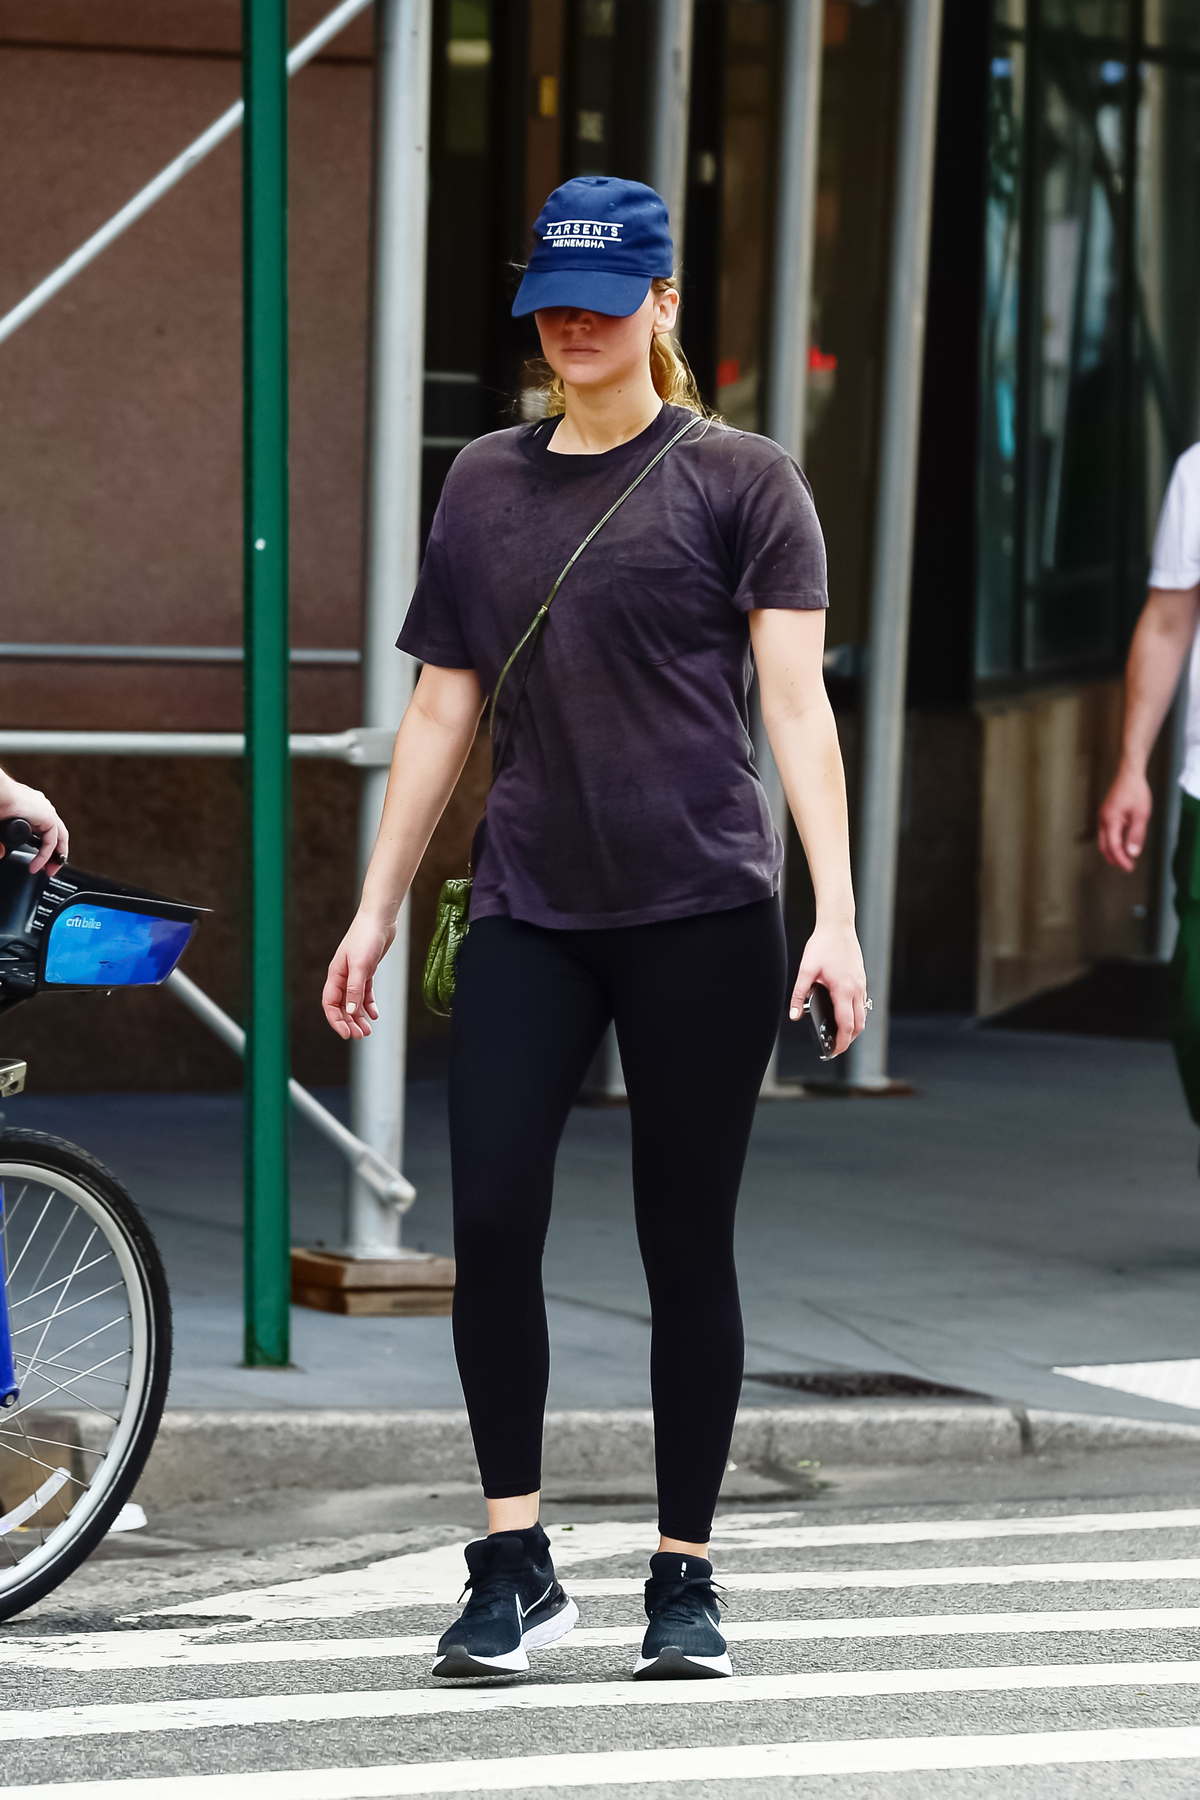 https://www.celebsfirst.com/wp-content/uploads/2022/09/jennifer-lawrence-opts-for-casual-t-shirt-and-leggings-while-out-in-new-york-city-180922_5.jpg